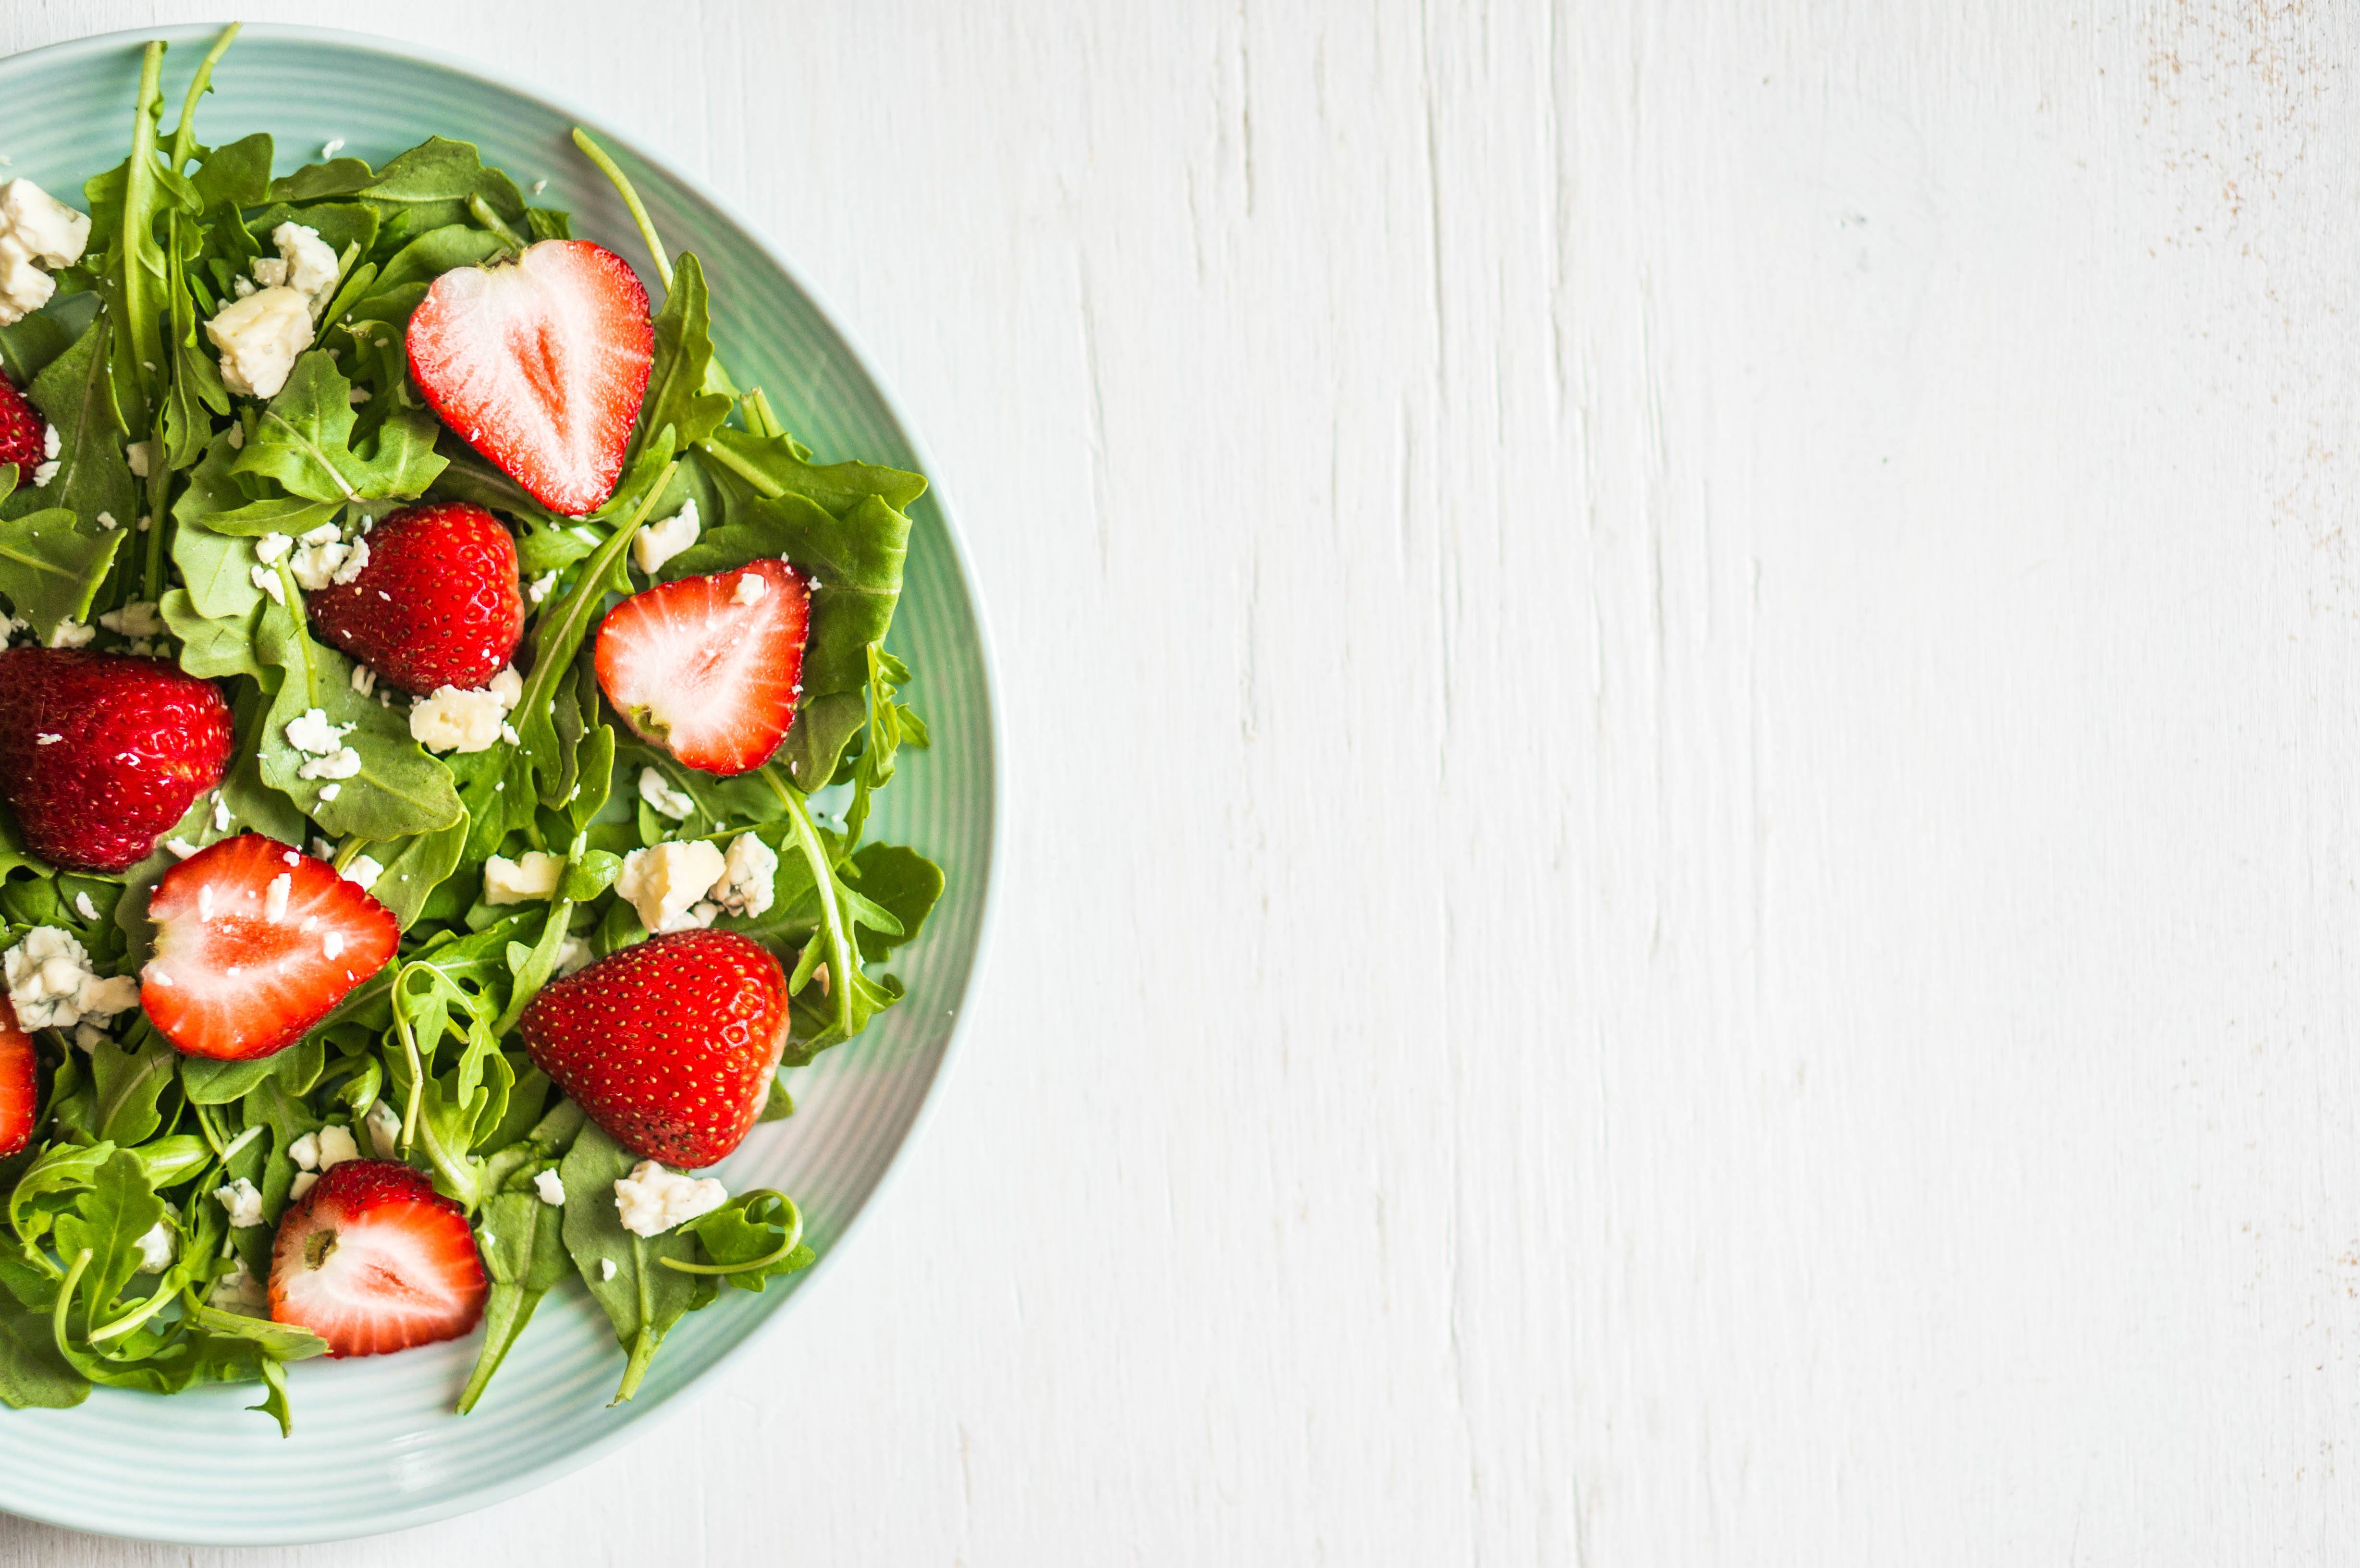 Salad with arugula and strawberries